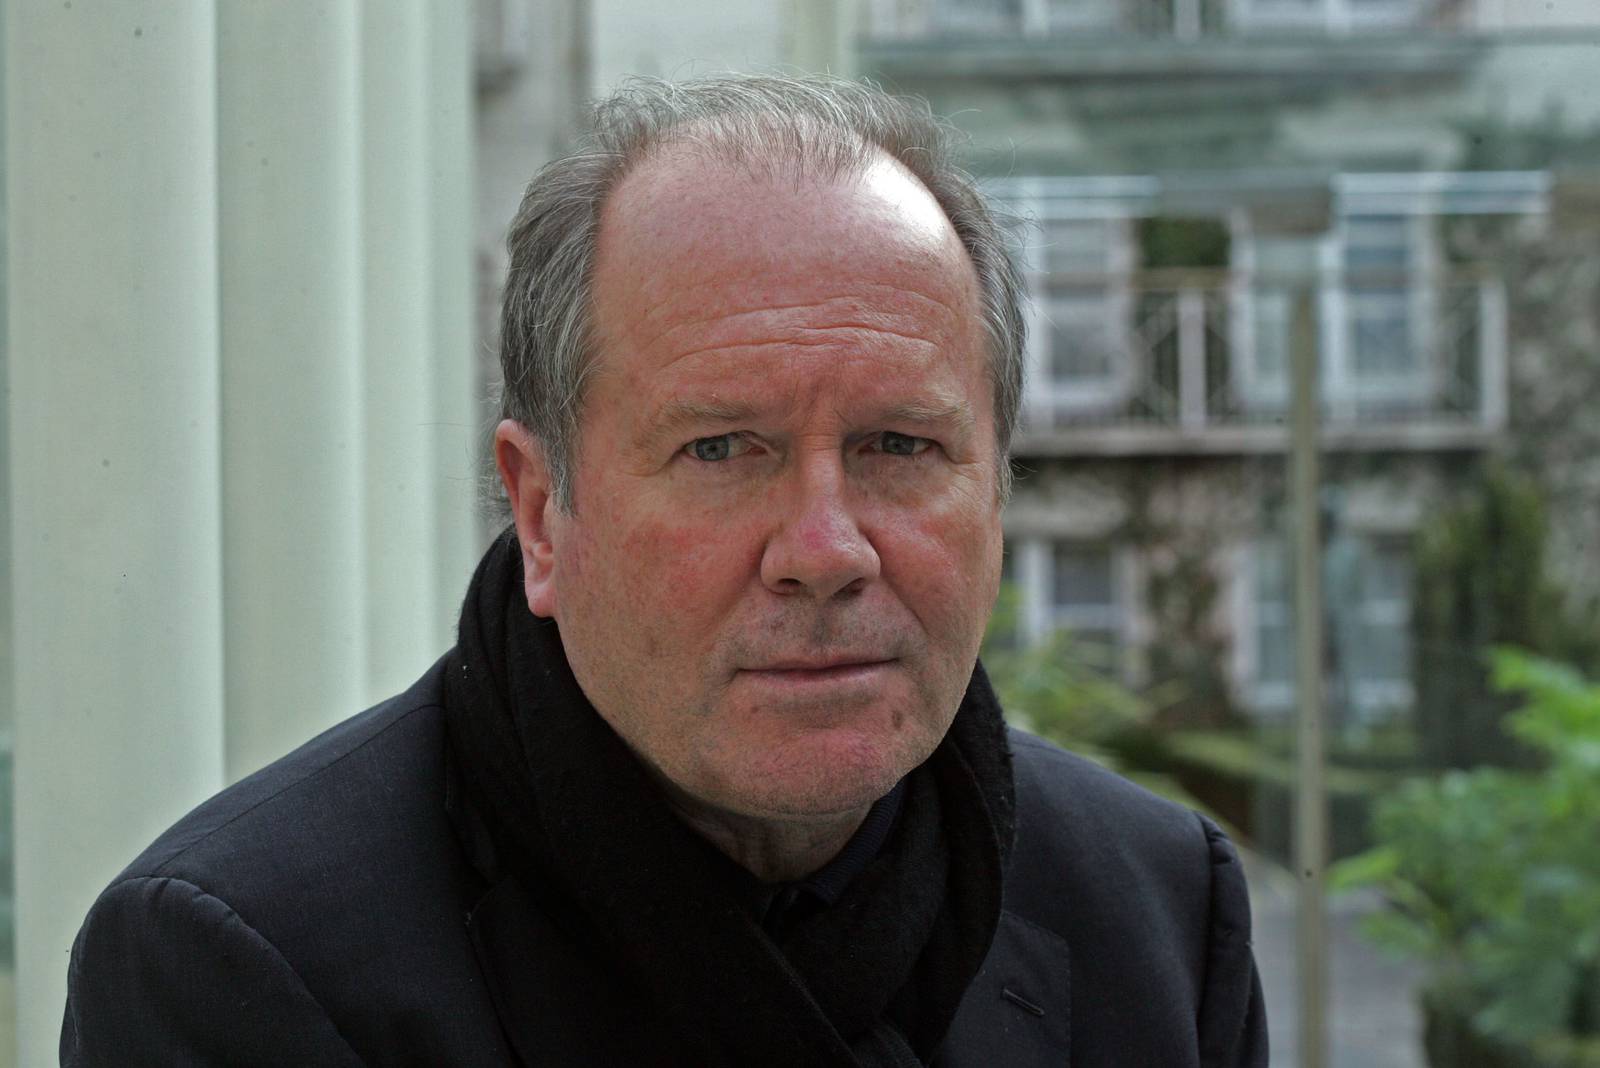 book review the romantic william boyd